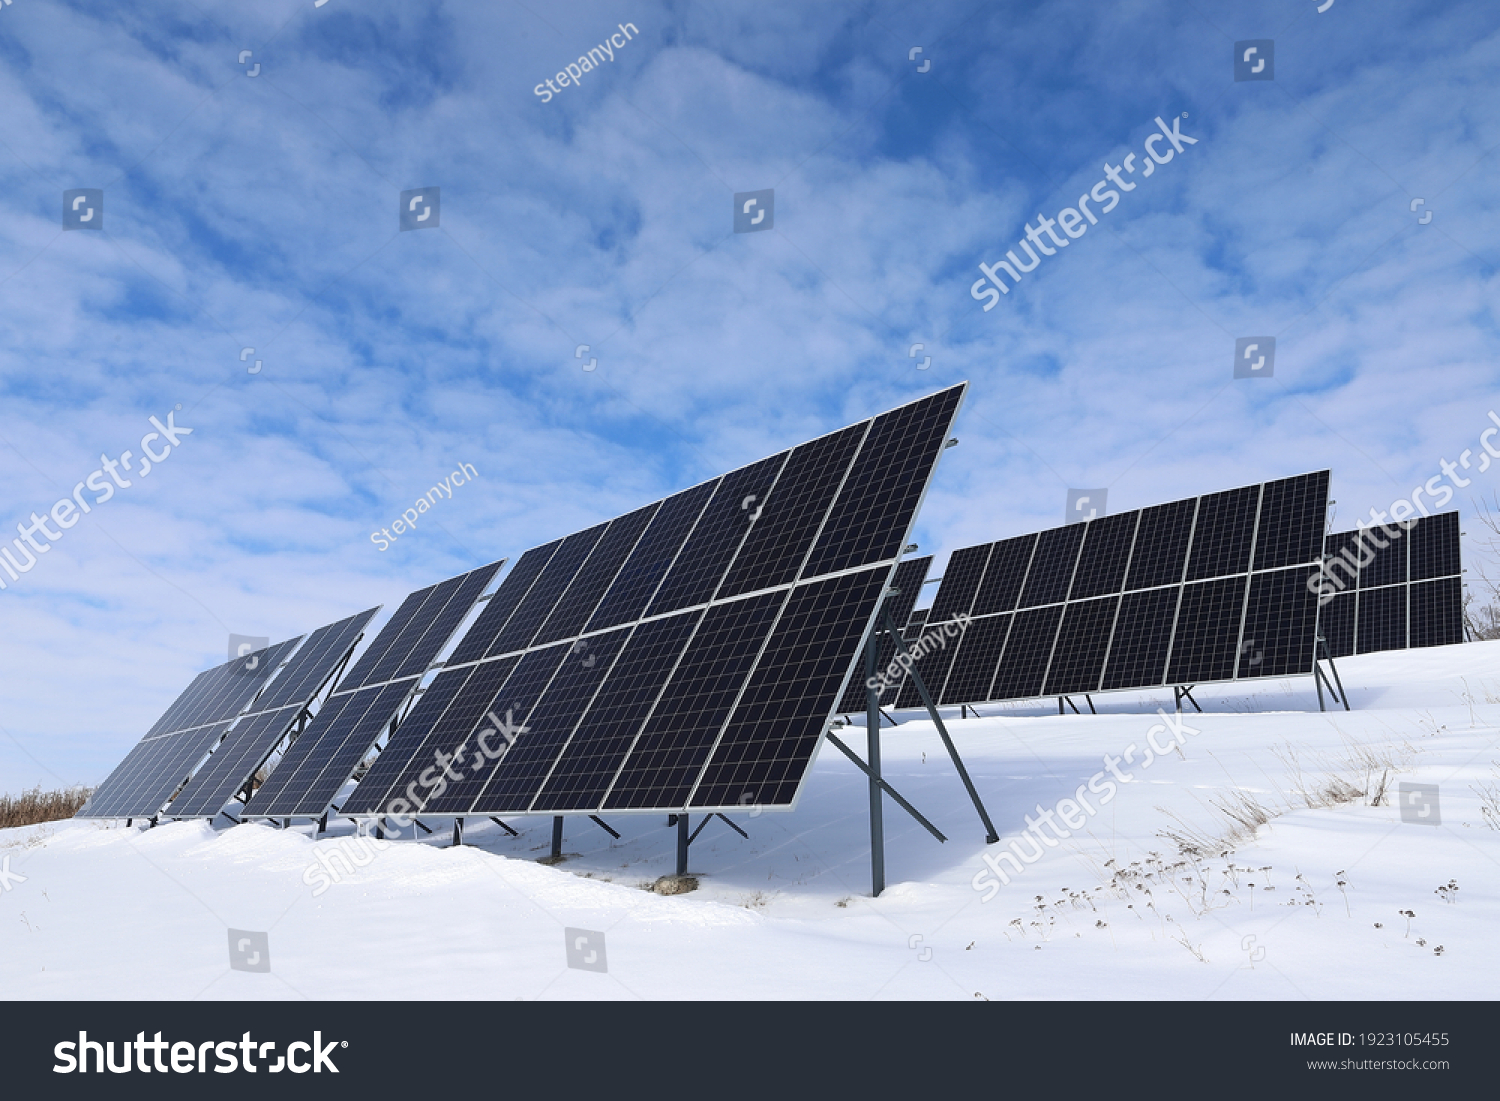 Solar panels Photovoltaic cells on a background of white and blue sky and snow. Alternative ecological solar energy. #1923105455